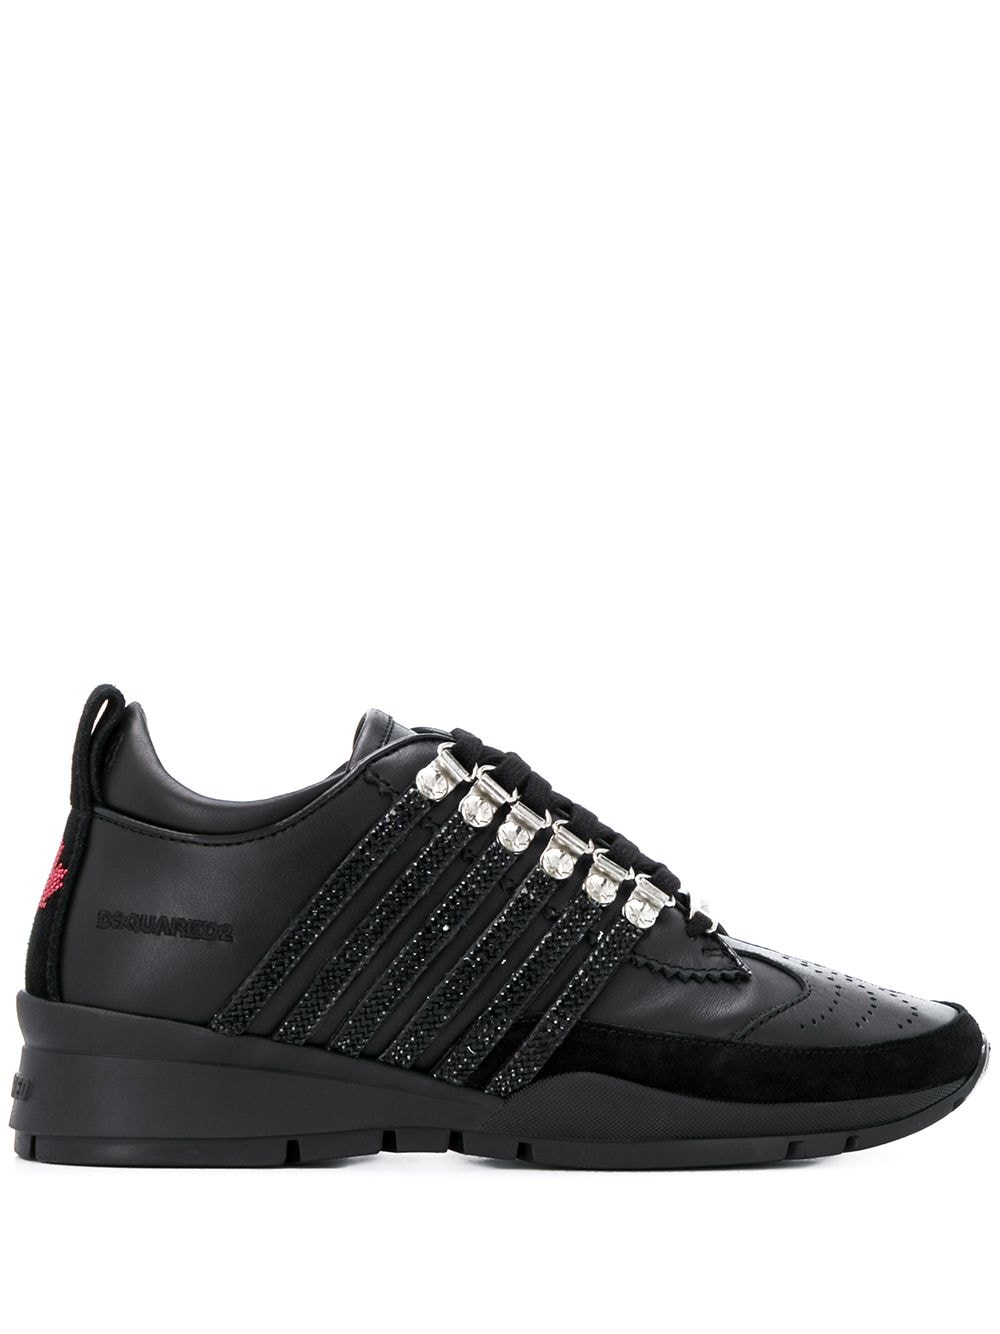 Dsquared2 Glitter Embellished 251 Trainers In Black